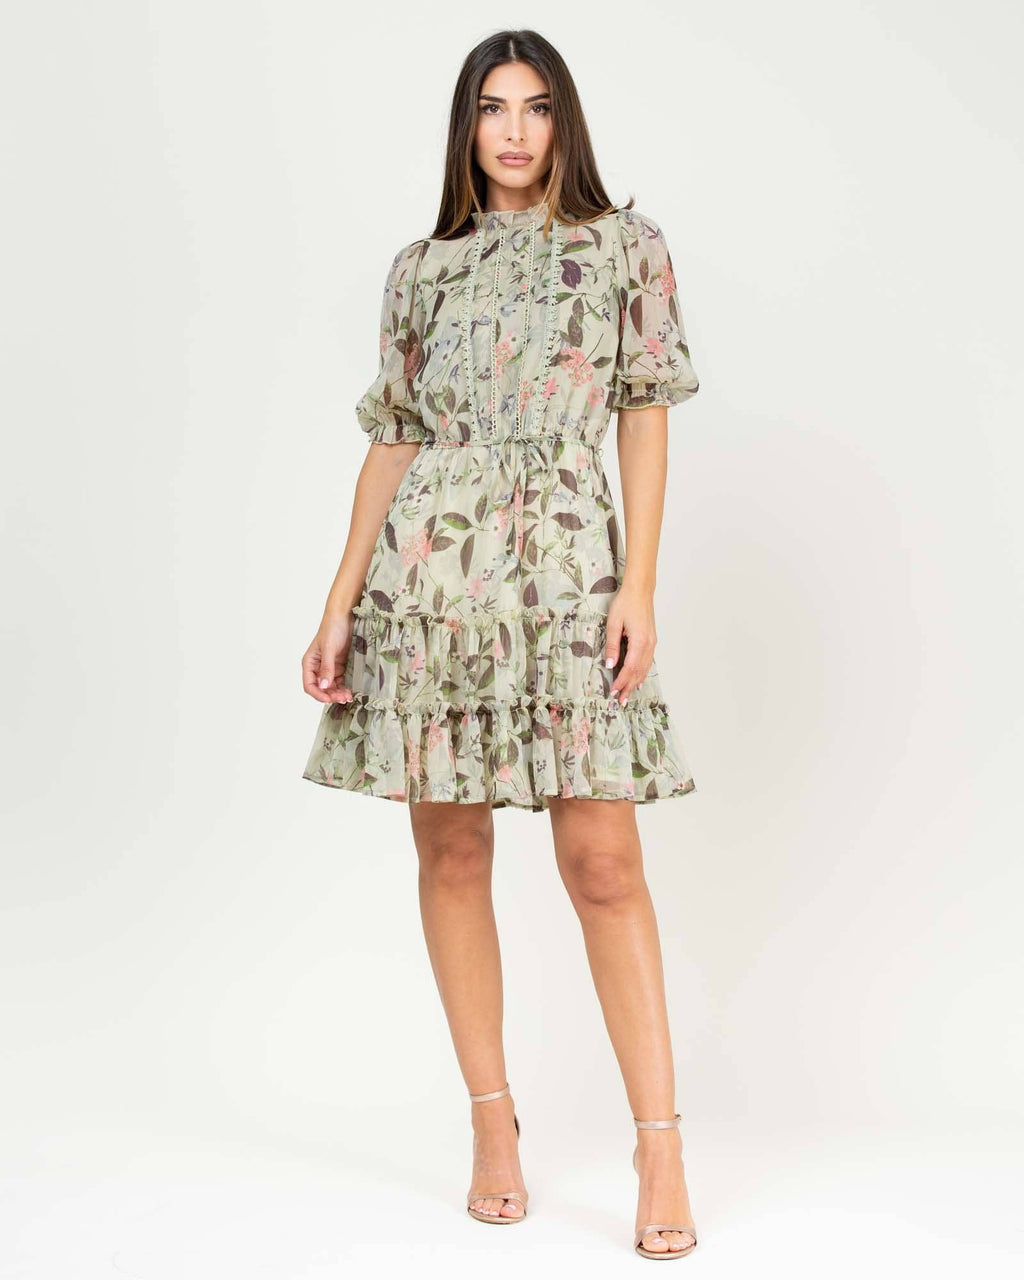 NIZA - Dress With Floral Print and High Neck